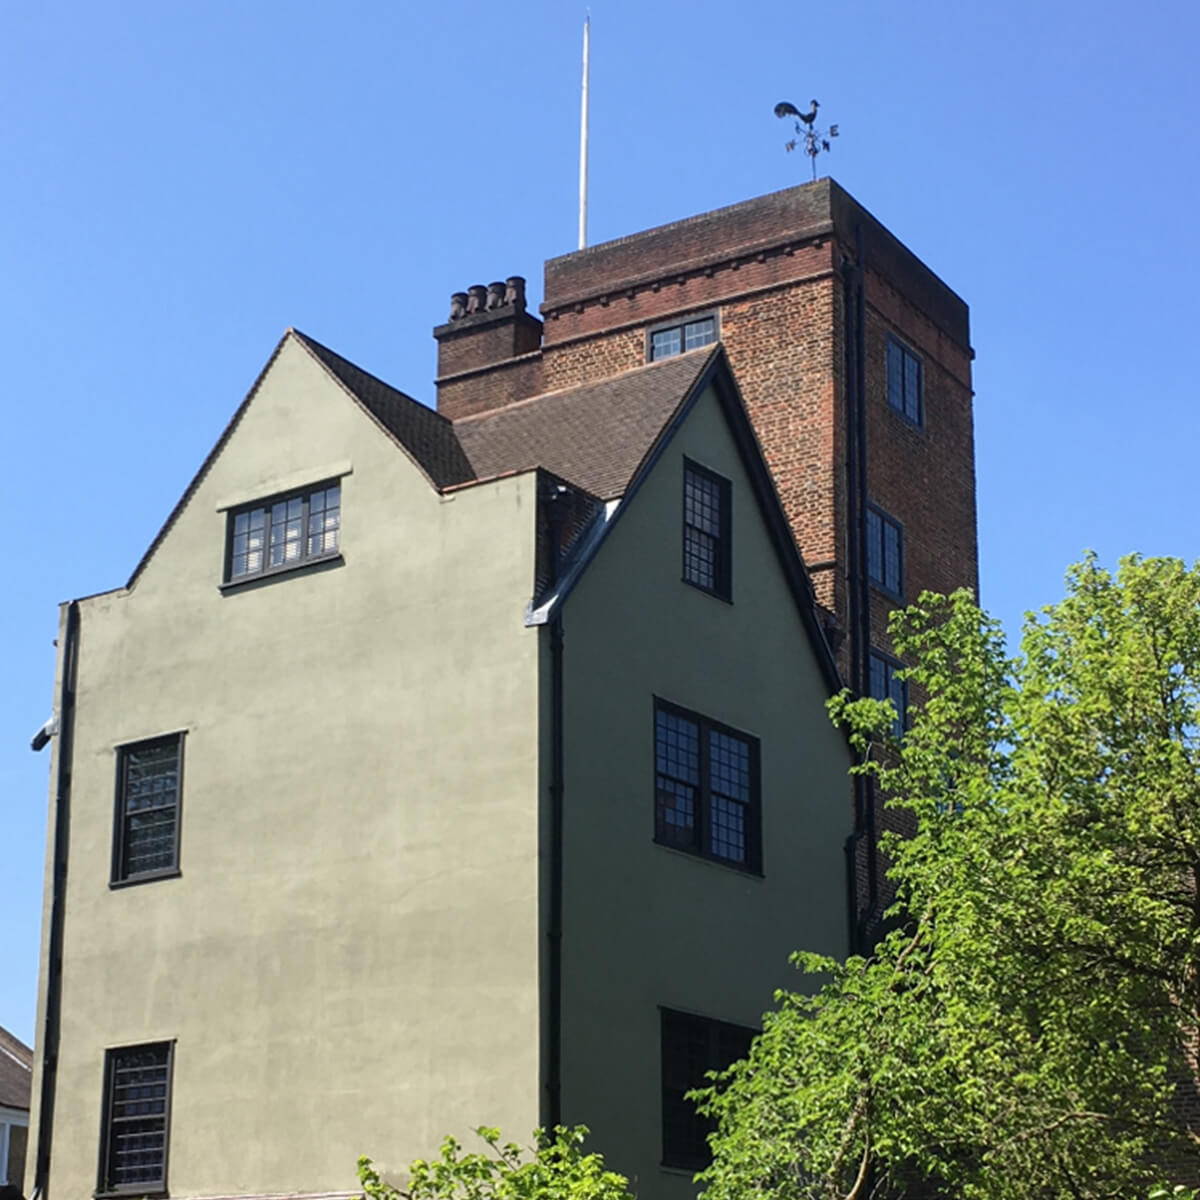 The exterior of the Canonbury Tower.